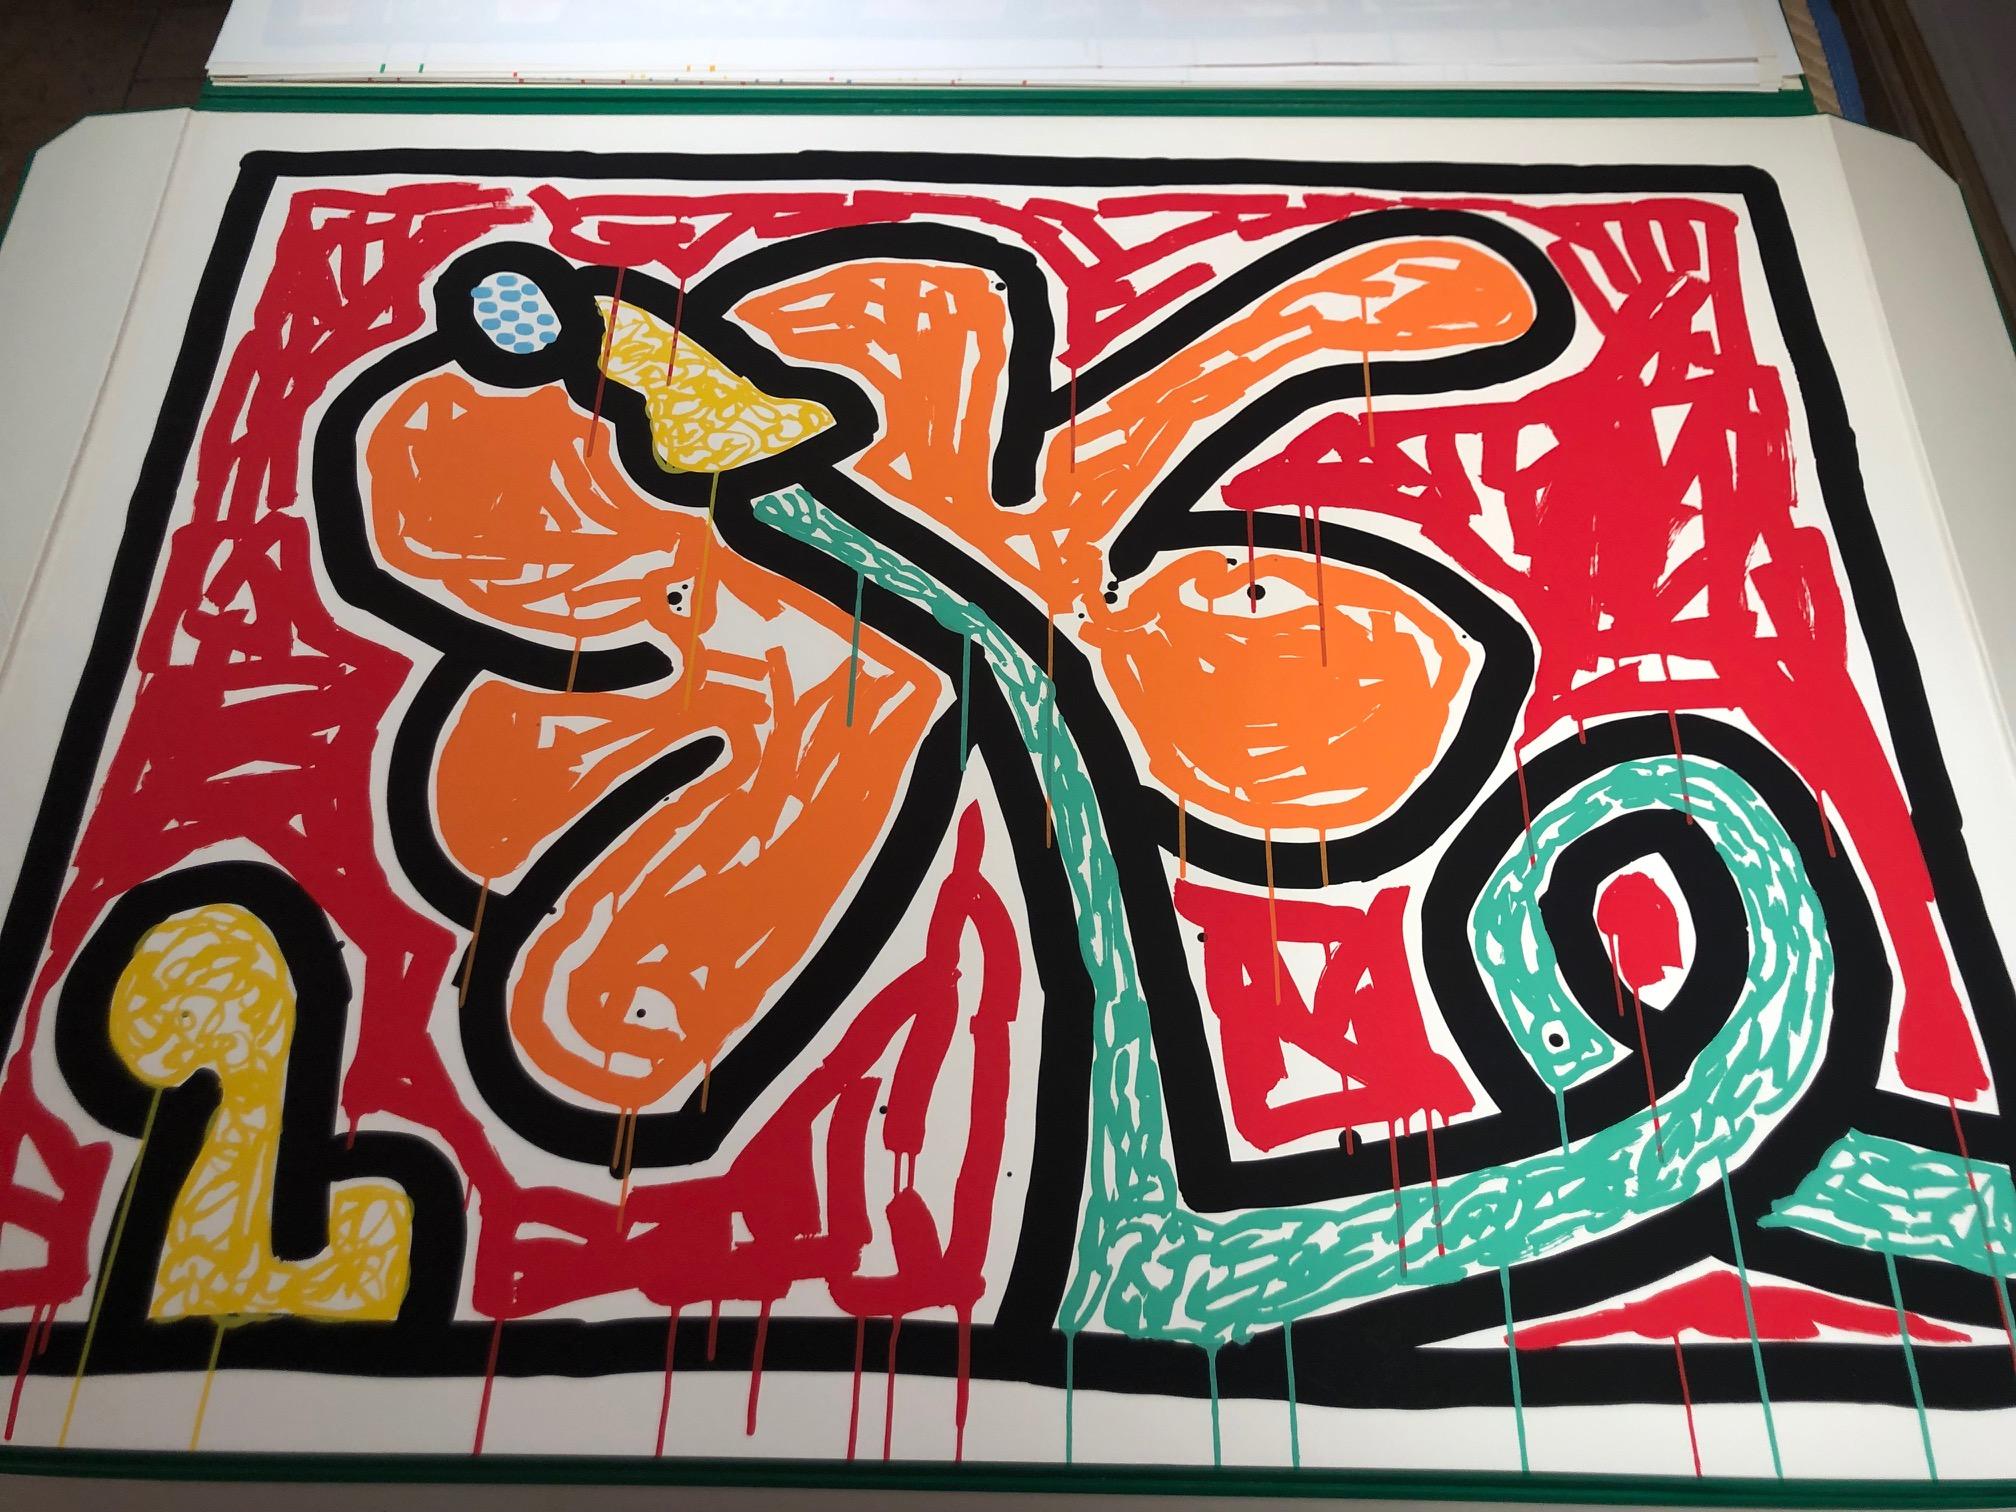 Flowers (5) - Print by Keith Haring